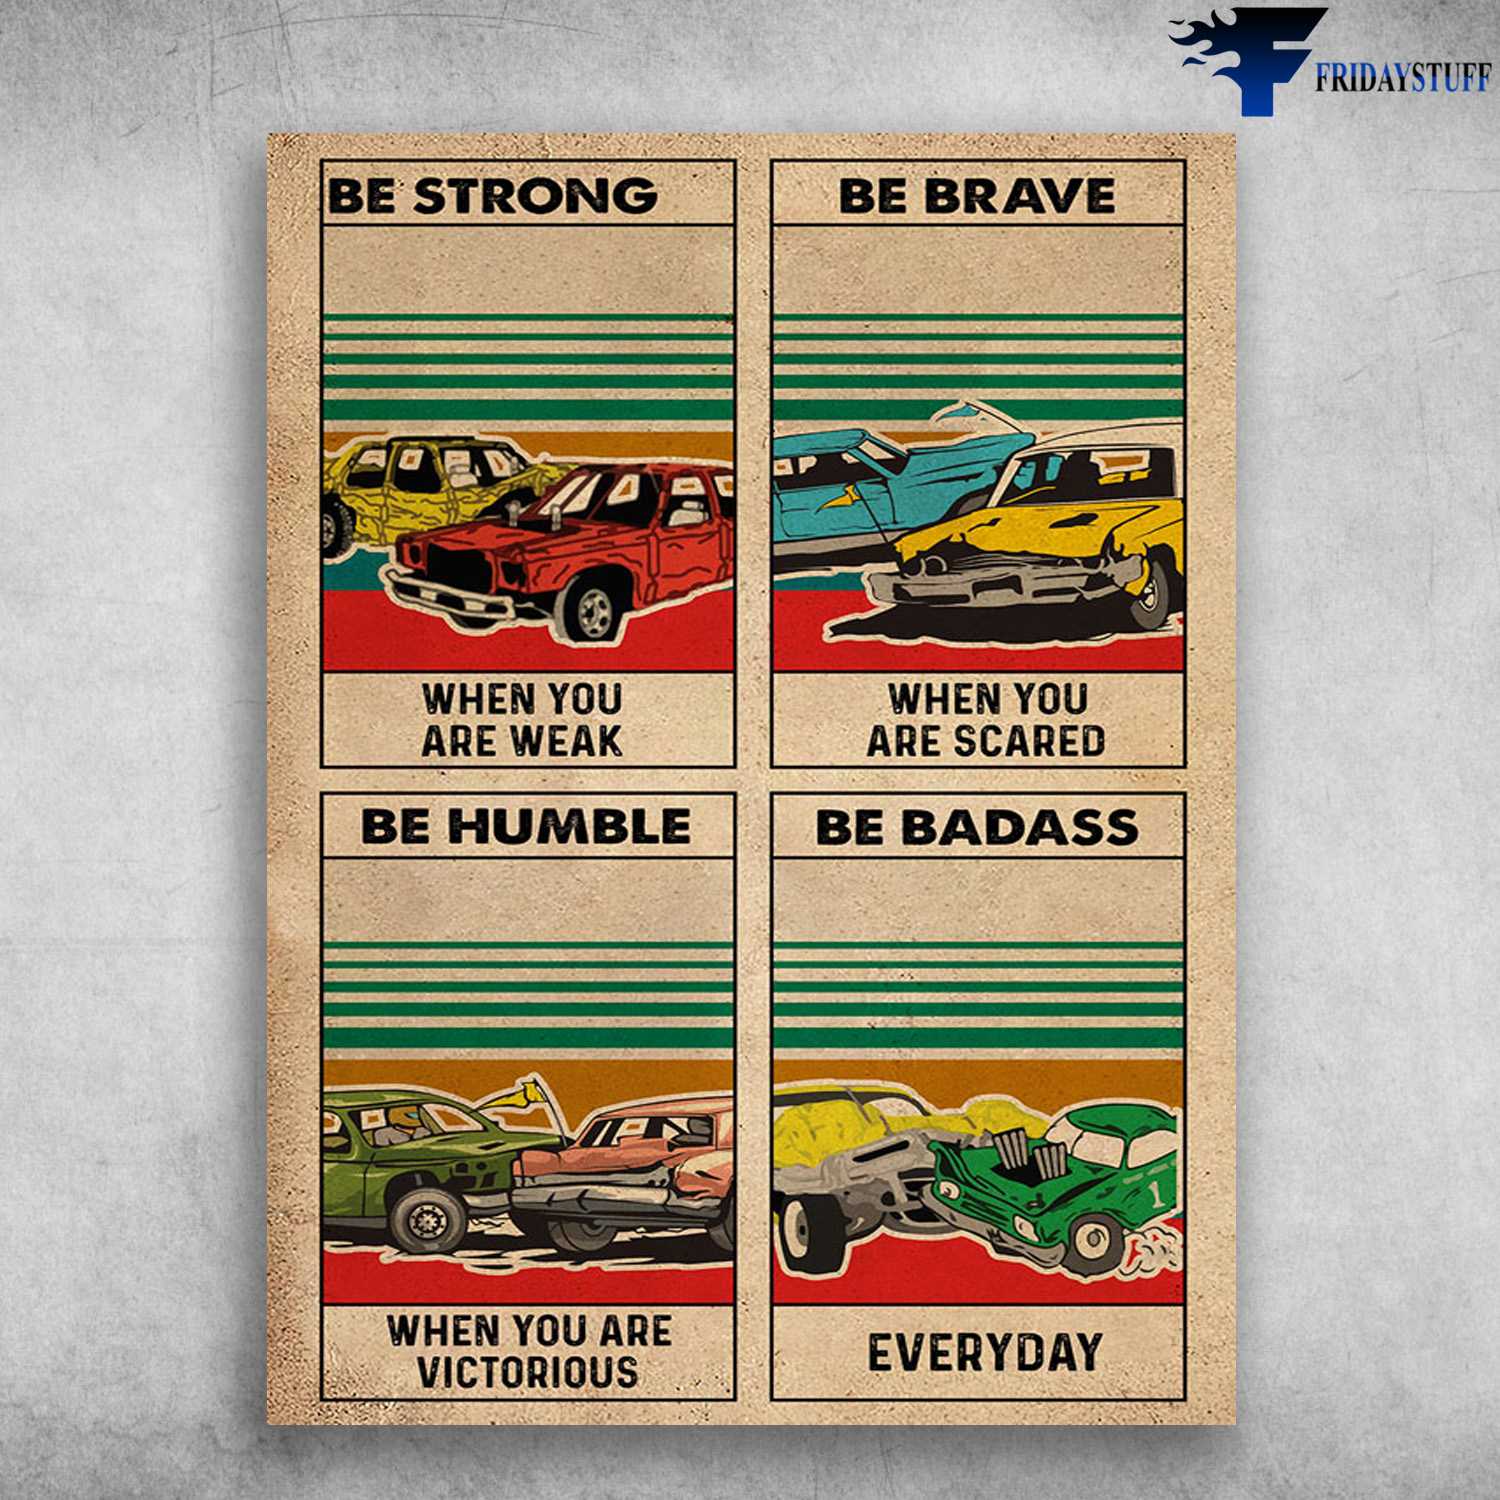 Car Poster, Driving Car - Be Strong When You Are Weak, Be Brave When You Are Scared, Be Humble When You Are Victorious, Be Badass Everyday